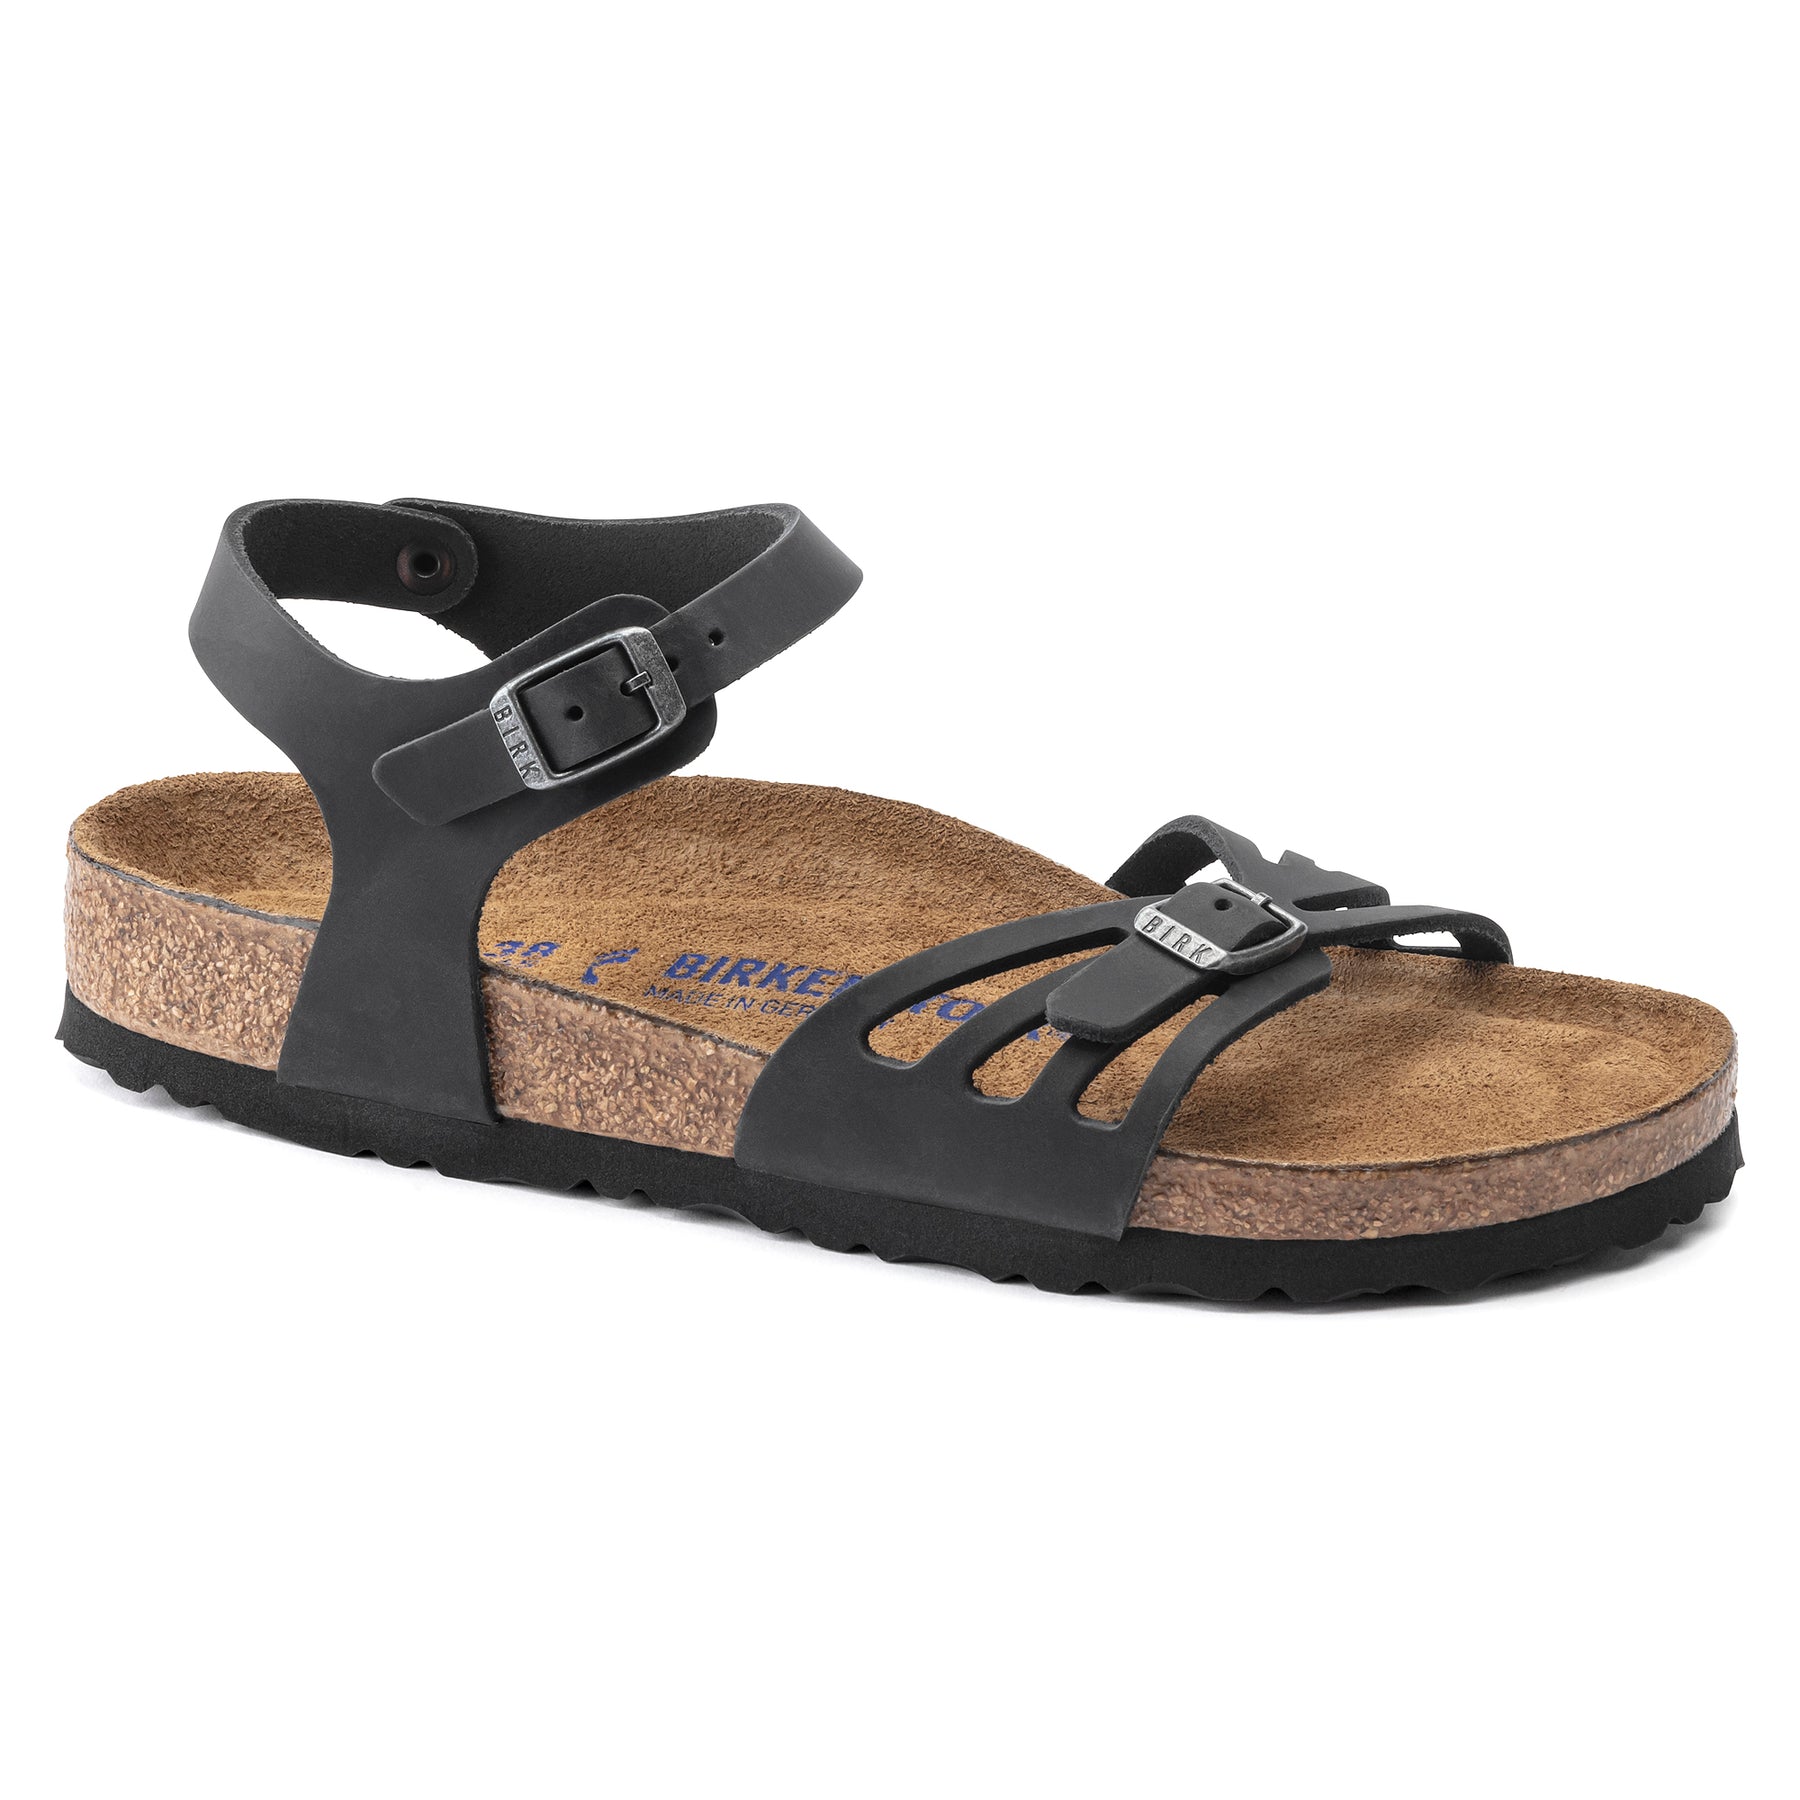 Limited Edition Bali Footbed black oiled leather